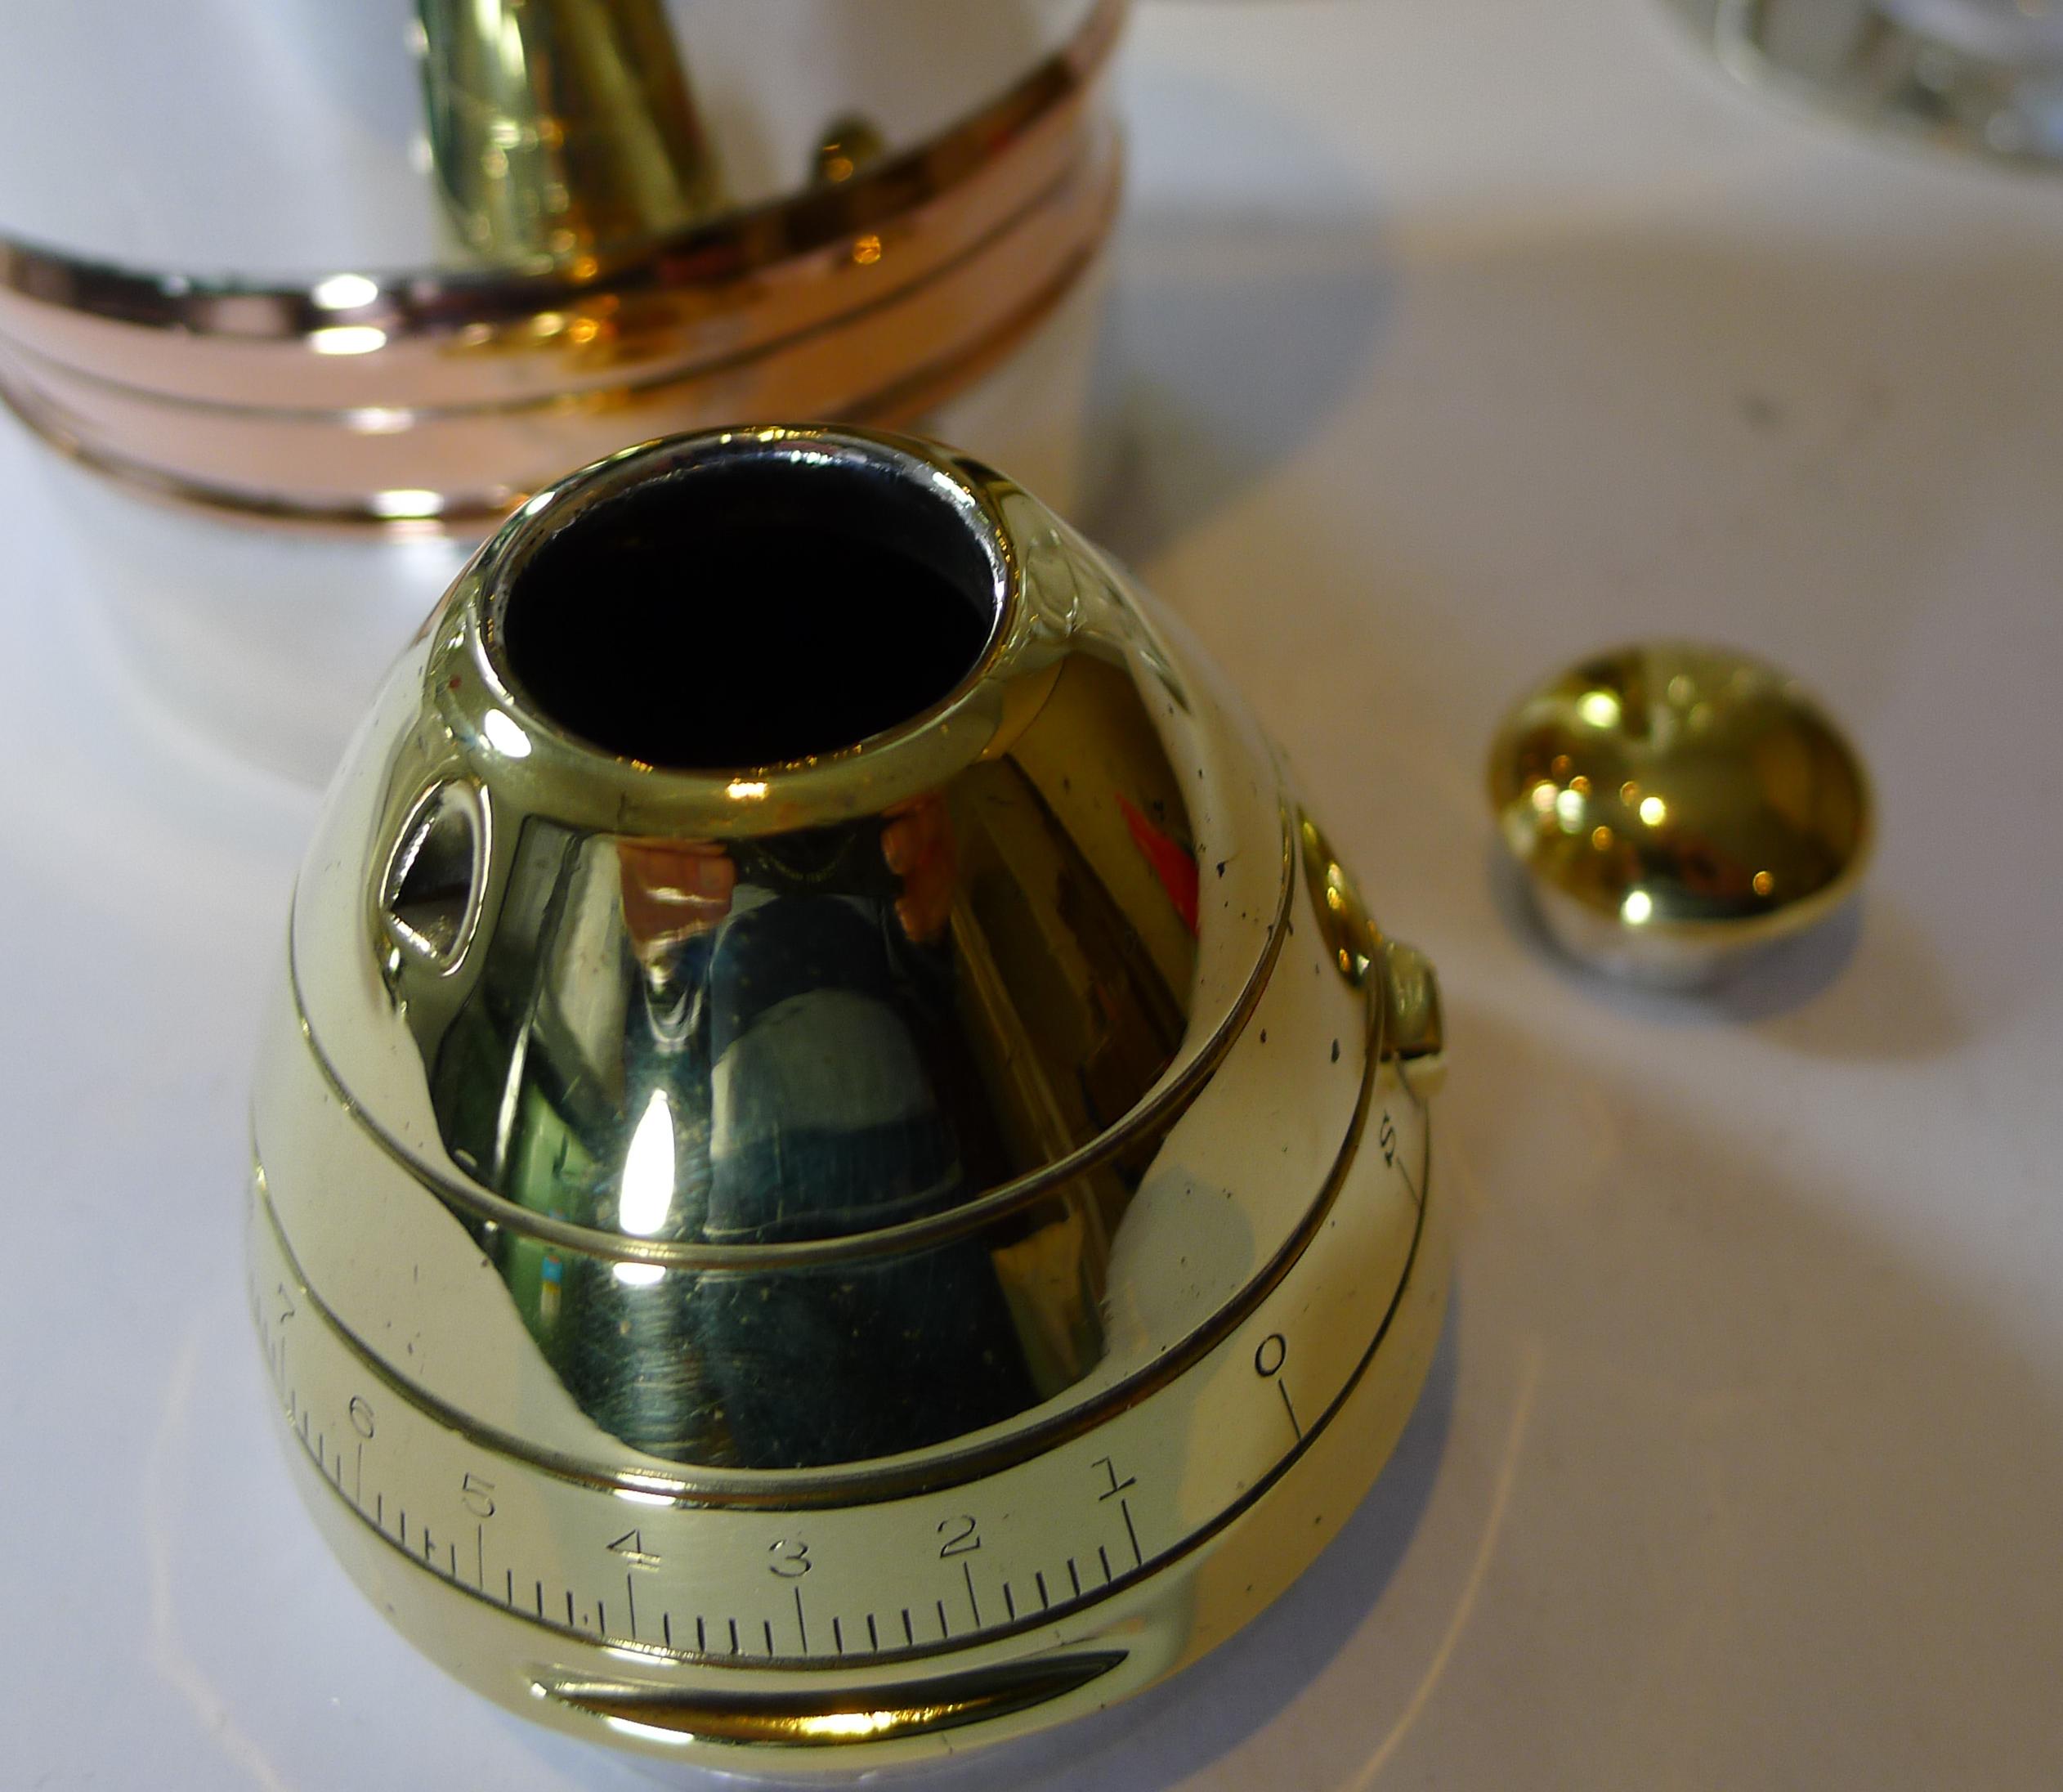 A magnificent and highly sought-after American Gorham Silver Company Cocktail Shaker created in the form of an WW1 Artillery gun shell.

Made from silver plate, gold plate and copper; the front part of the shell is the cocktail shaker marked on